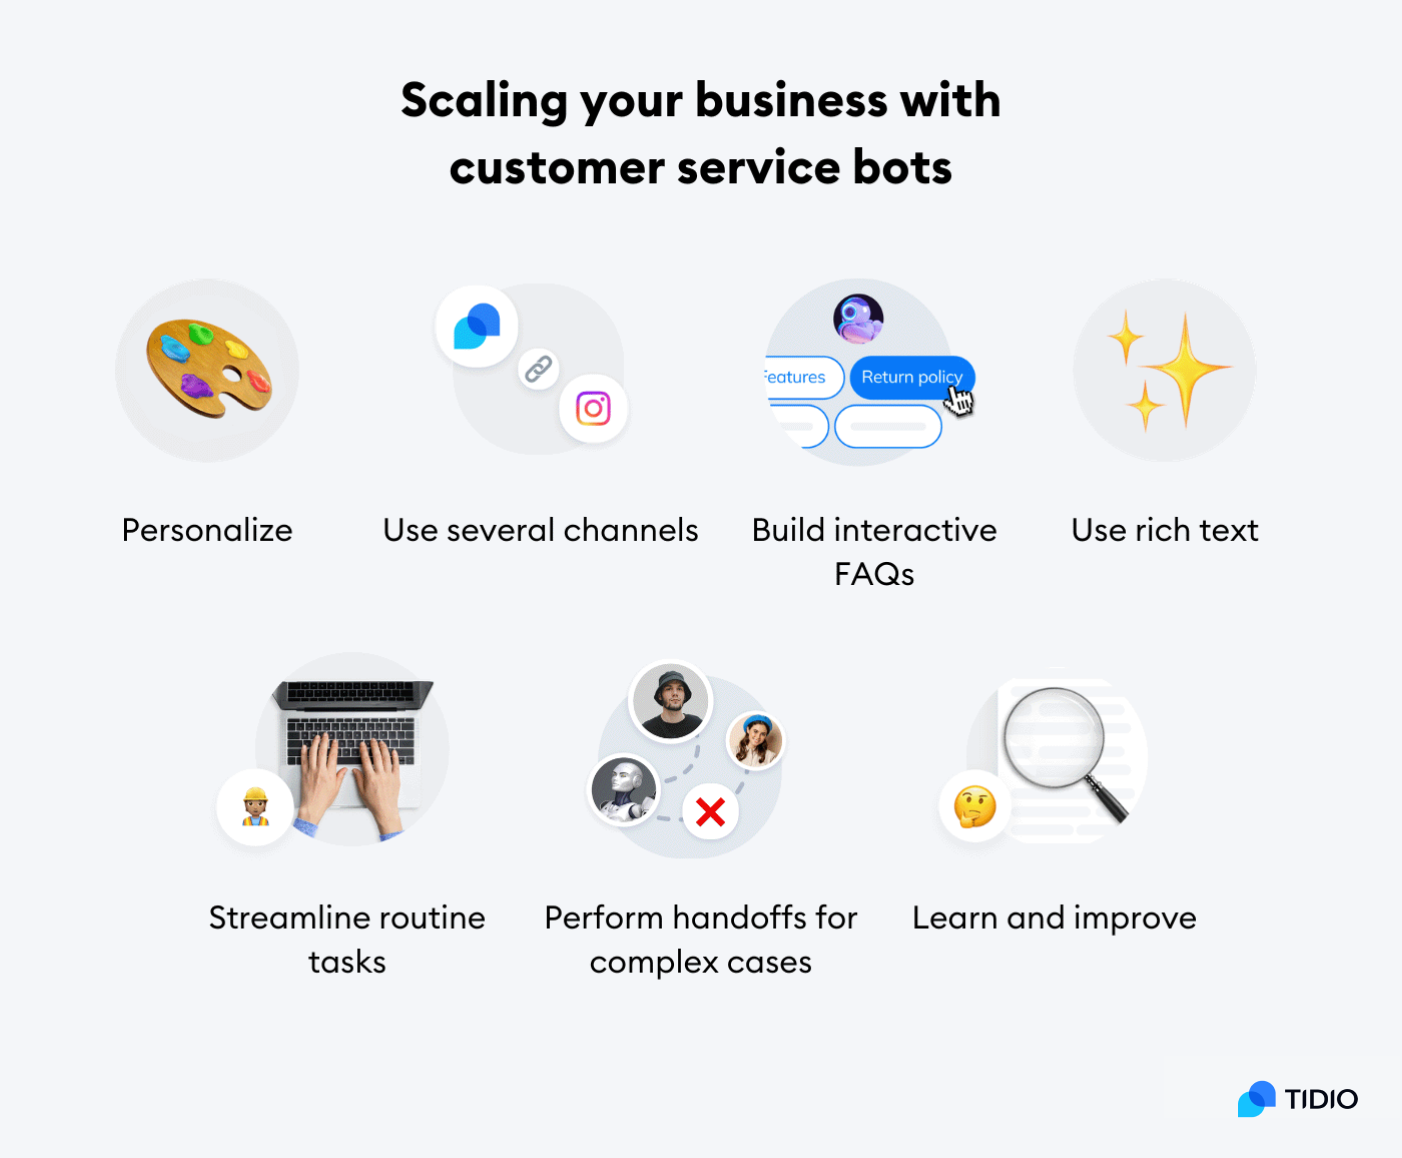 Best practices for using customer service bots on image